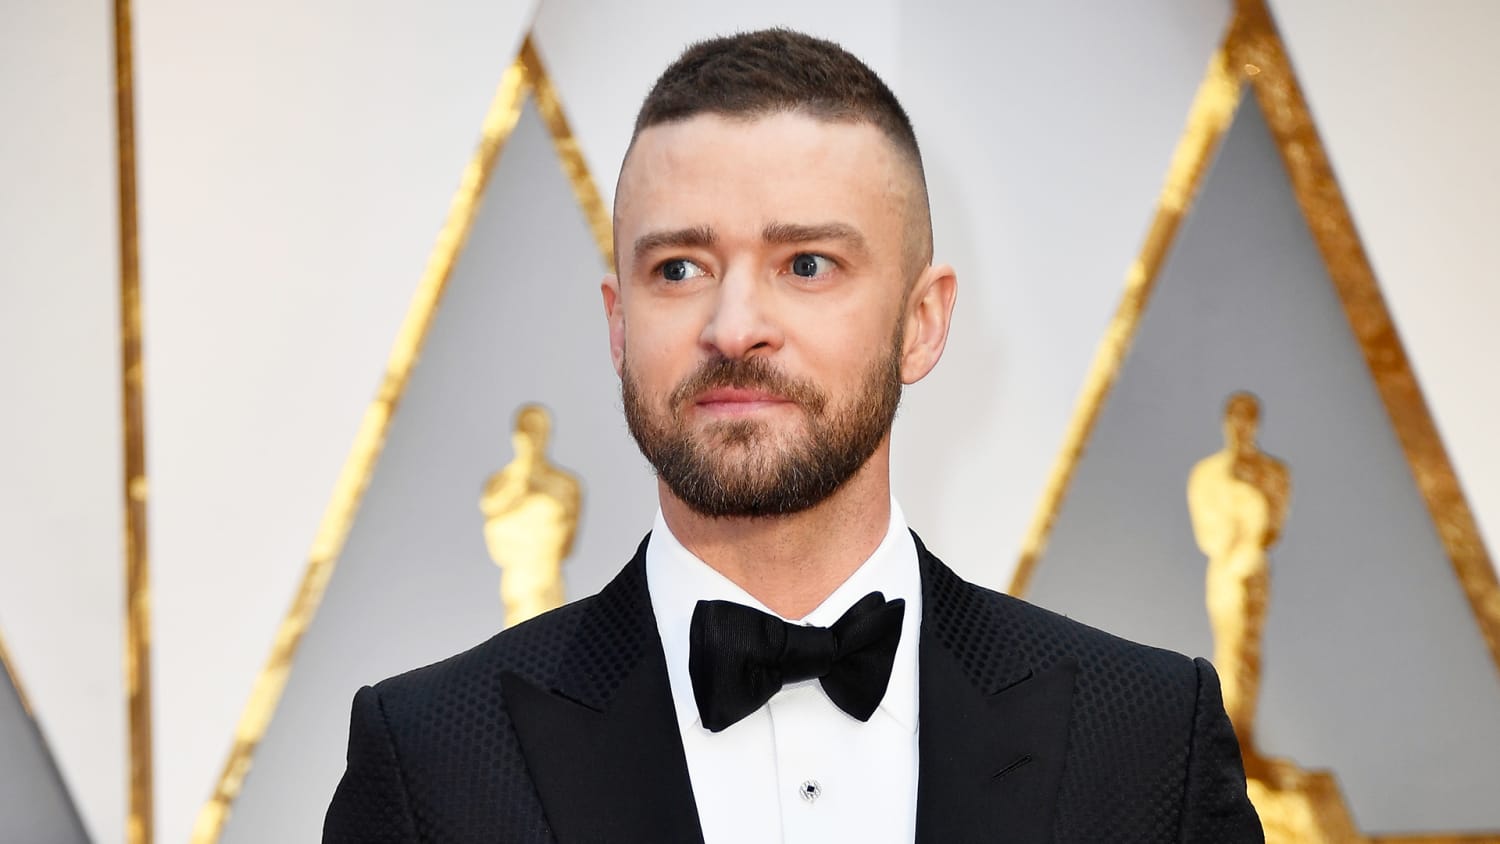 Justin Timberlake shows us what 'dad life' is all about with funny play-class pic